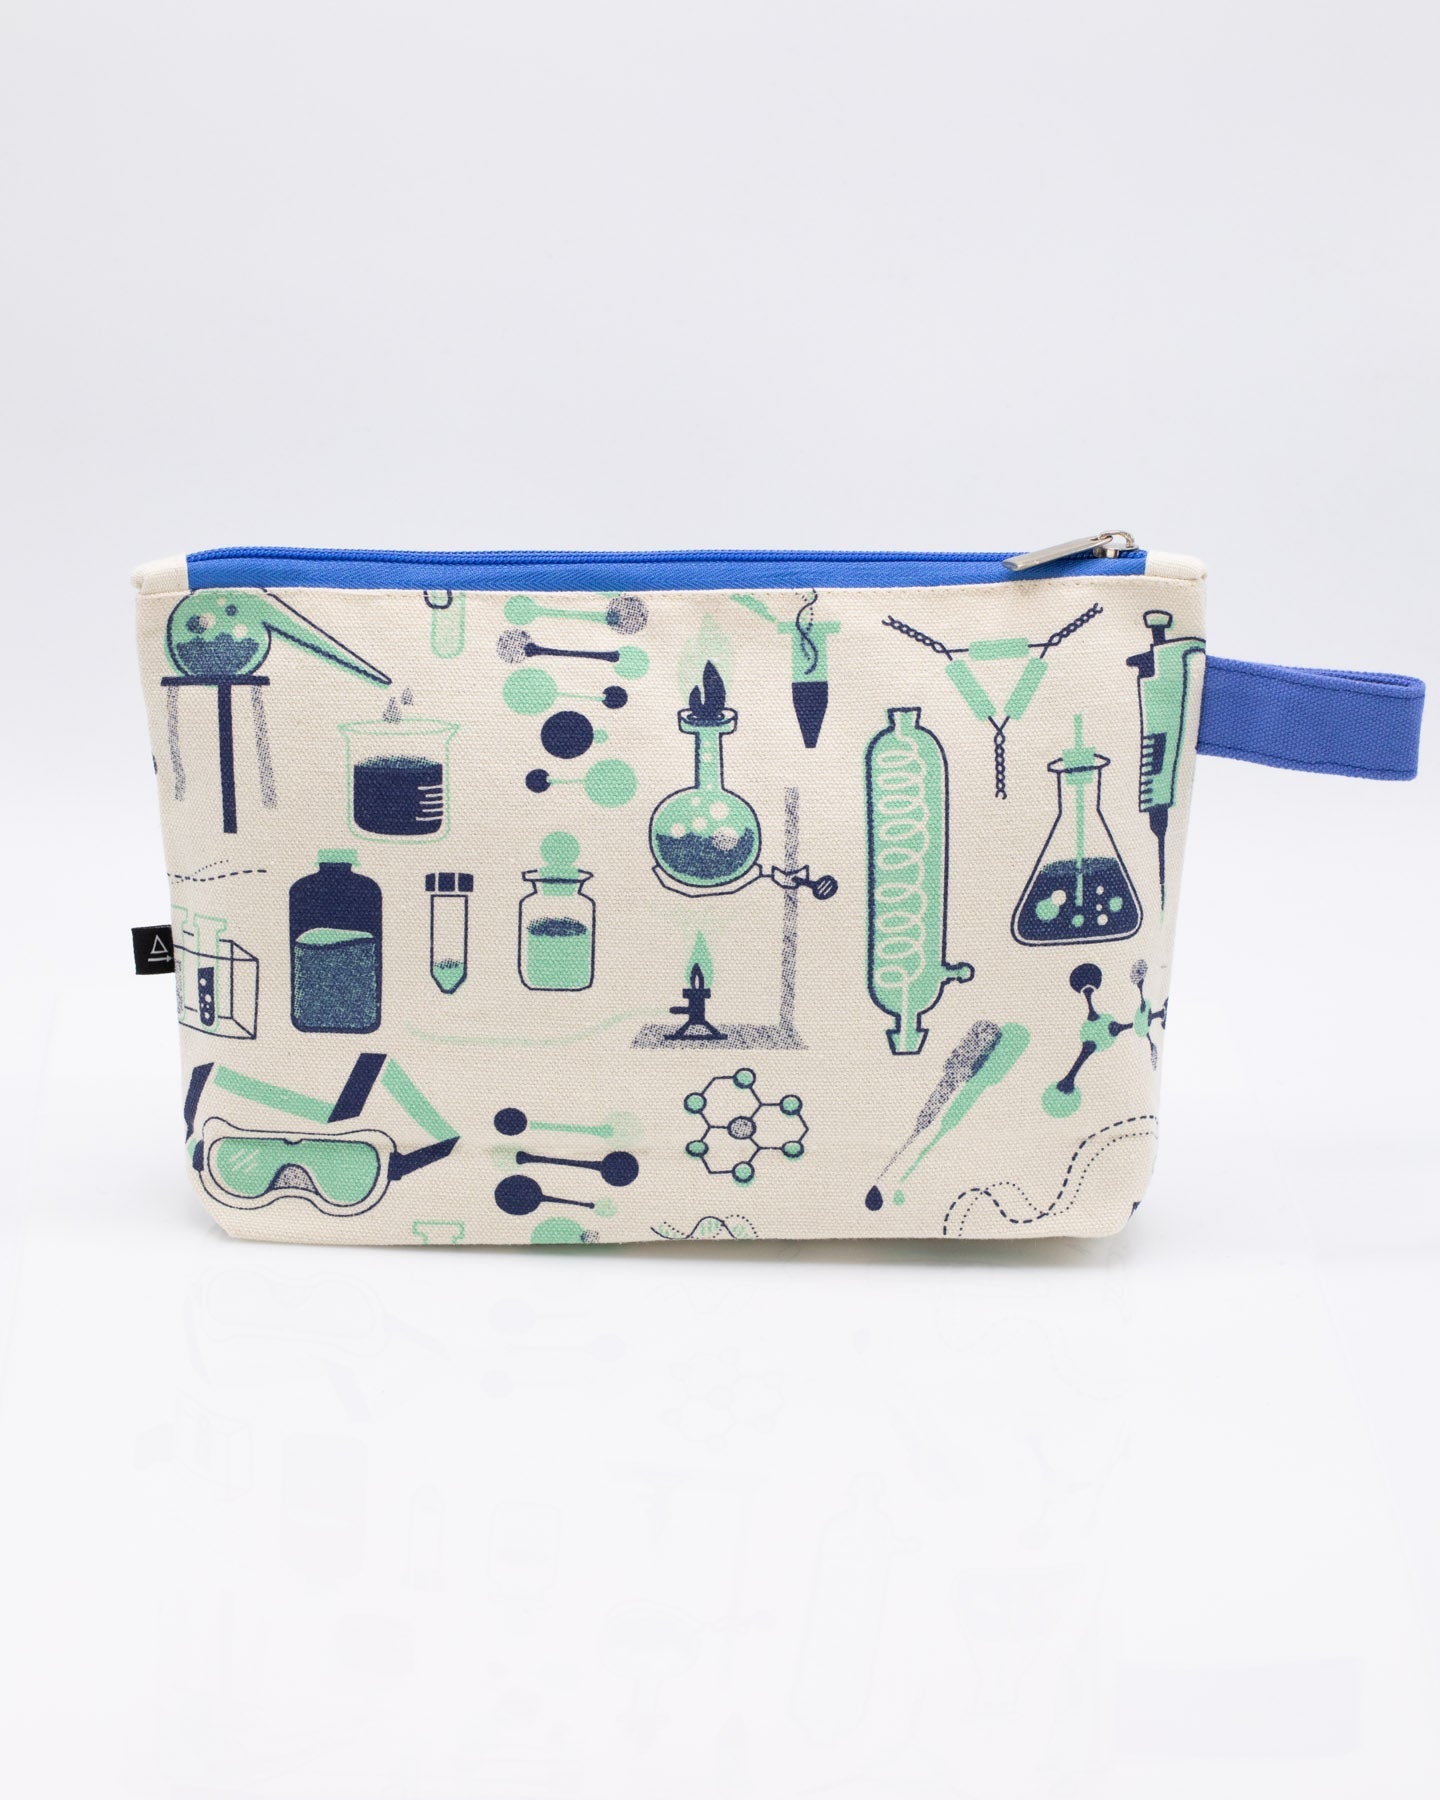 The Retro Lab Zip Bag is a funky update to your normal portable storage case.  Fill with extra pipette tubes, protective goggles, or travel toiletries for trips outside the lab.